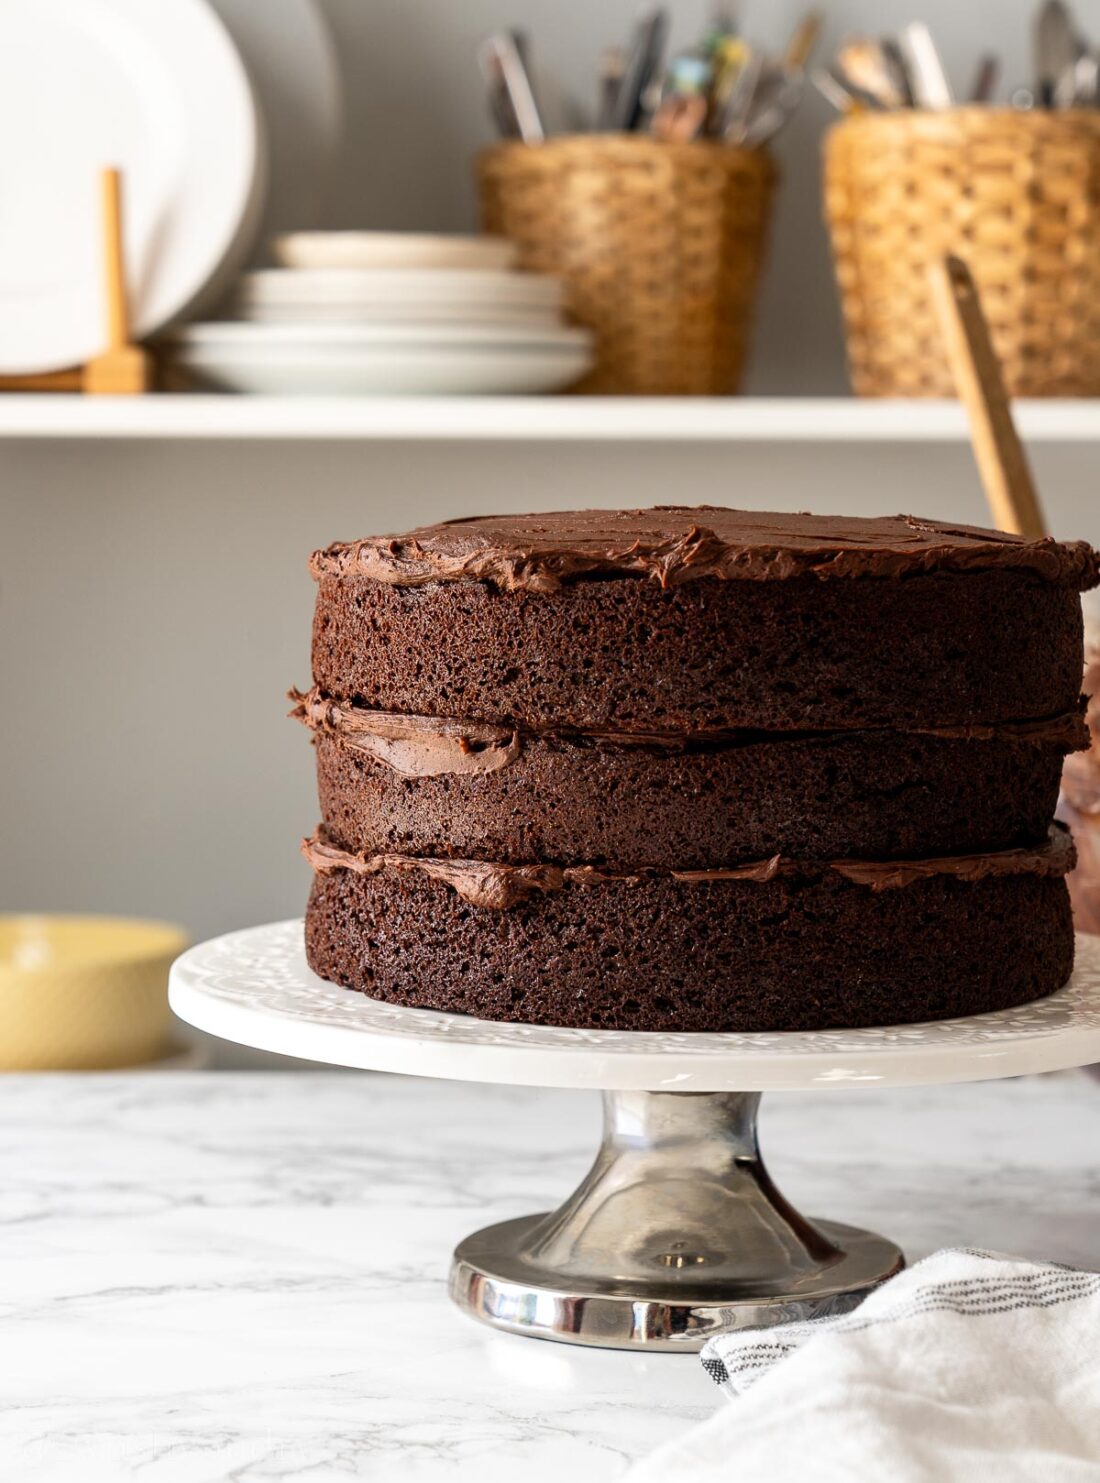 layered chocolate cake rounds with chocolate frosting between each layer.